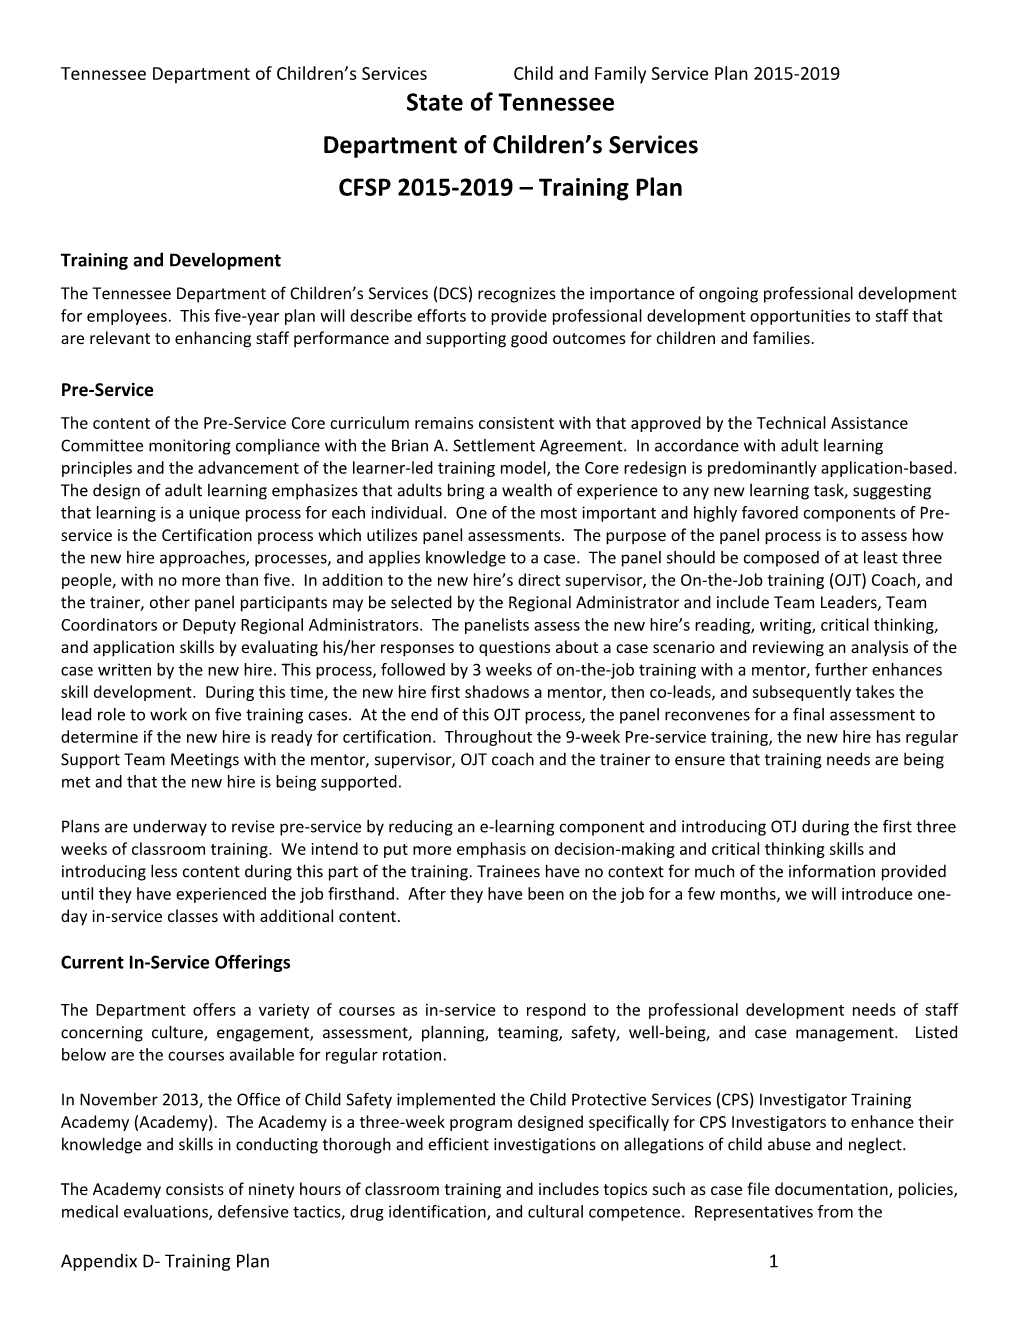 Tennessee Department of Children S Services Child and Family Service Plan 2015-2019